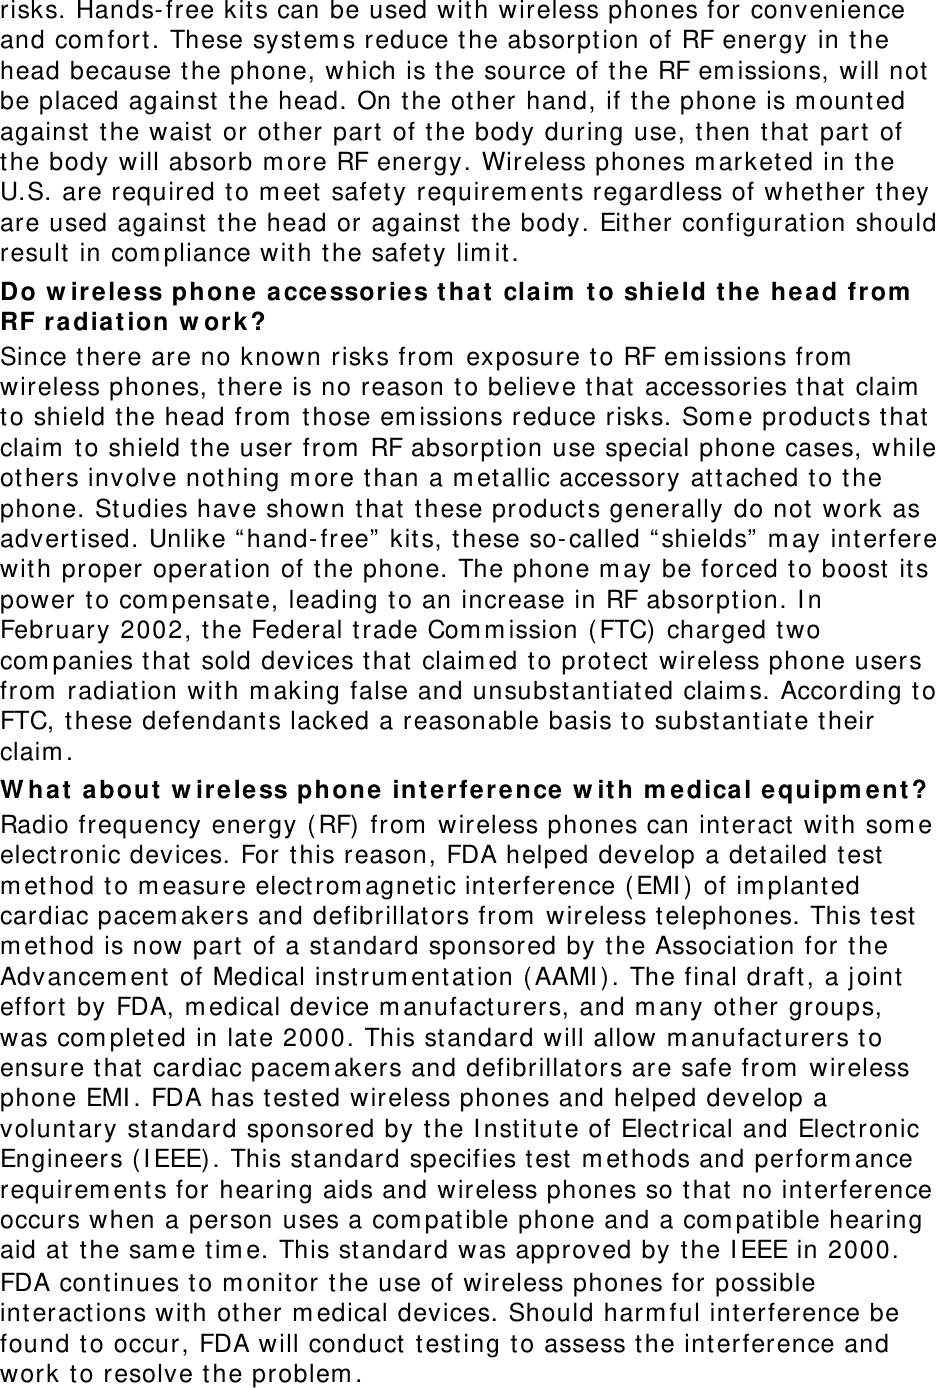 risks. Hands- free kit s can be used wit h wireless phones for convenience and com fort . These syst em s reduce t he absorpt ion of RF energy in t he head because the phone, which is the source of the RF em issions, will not  be placed against  t he head. On t he other hand, if t he phone is m ounted against  the waist or ot her part of the body during use, t hen t hat  part of the body will absorb m ore RF energy. Wireless phones m arketed in t he U.S. are required t o m eet  safet y requirem ent s regardless of whet her they are used against  the head or against  t he body. Eit her configurat ion should result  in com pliance wit h the safety lim it. Do w ir eless phone a cce ssories t ha t  claim  t o shie ld t he head from  RF radia t ion w ork ? Since t here are no known risks from  exposure t o RF em issions from  wireless phones, there is no reason to believe t hat  accessories that  claim  to shield the head from  t hose em issions reduce risks. Som e product s that  claim  to shield t he user from  RF absorpt ion use special phone cases, while others involve not hing m ore t han a m et allic accessory at t ached t o t he phone. St udies have shown t hat  t hese product s generally do not work as advertised. Unlike “hand- free”  kit s, these so- called “ shields”  m ay interfere wit h proper operat ion of t he phone. The phone m ay be forced to boost  it s power t o com pensat e, leading to an increase in RF absorption. I n February 2002, t he Federal t rade Com m ission ( FTC) charged t wo com panies that  sold devices t hat  claim ed t o prot ect  wireless phone users from  radiat ion wit h m aking false and unsubst ant iated claim s. According to FTC, t hese defendant s lacked a reasonable basis t o substantiate t heir claim . W h a t  a bout w ir e le ss phone int erference w it h m e dical equipm ent? Radio frequency energy ( RF) from  wireless phones can interact wit h som e elect ronic devices. For t his reason, FDA helped develop a detailed t est  m et hod to m easure elect rom agnet ic int erference ( EMI )  of im planted cardiac pacem akers and defibrillators from  wireless telephones. This t est  m et hod is now part of a st andard sponsored by t he Associat ion for t he Advancem ent  of Medical inst rum ent at ion ( AAMI ) . The final draft, a j oint effort  by FDA, m edical device m anufact urers, and m any ot her groups, was com plet ed in lat e 2000. This st andard will allow m anufact urers t o ensure t hat  cardiac pacem akers and defibrillat ors are safe from  wireless phone EMI . FDA has t est ed wireless phones and helped develop a voluntary st andard sponsored by the I nst itute of Elect rical and Electronic Engineers ( I EEE) . This st andard specifies t est  m et hods and perform ance requirem ent s for hearing aids and wireless phones so t hat  no interference occurs when a person uses a com pat ible phone and a com pat ible hearing aid at  the sam e t im e. This st andard was approved by t he I EEE in 2000. FDA continues t o m onit or the use of wireless phones for possible int eractions wit h ot her m edical devices. Should harm ful interference be found t o occur, FDA will conduct  t est ing t o assess the int erference and work to resolve the problem . 